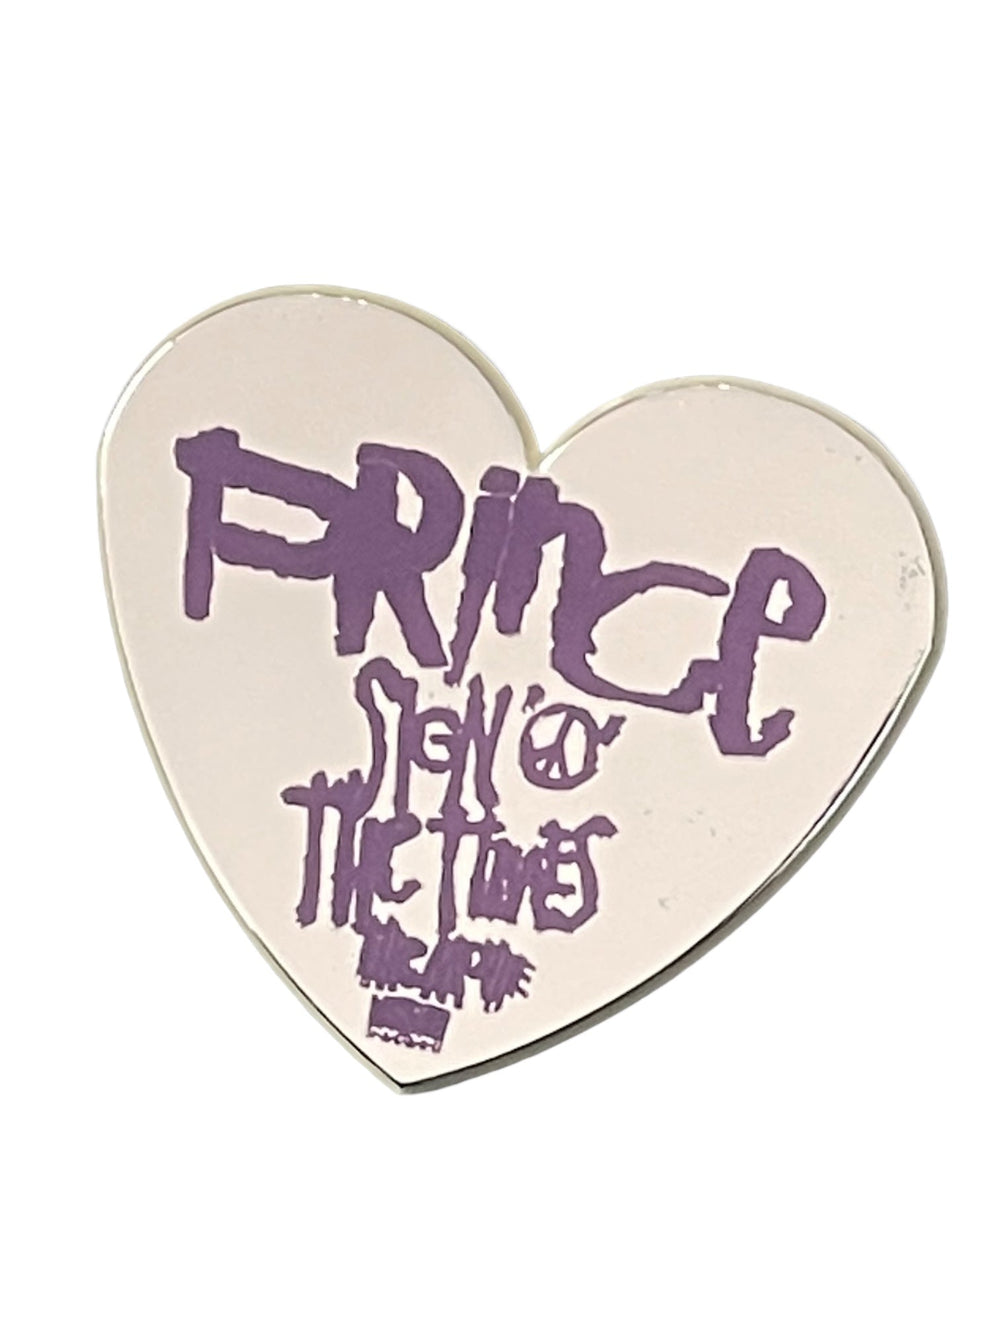 Prince – Sign O The Times The Movie Promotional Badge NEW: 1988